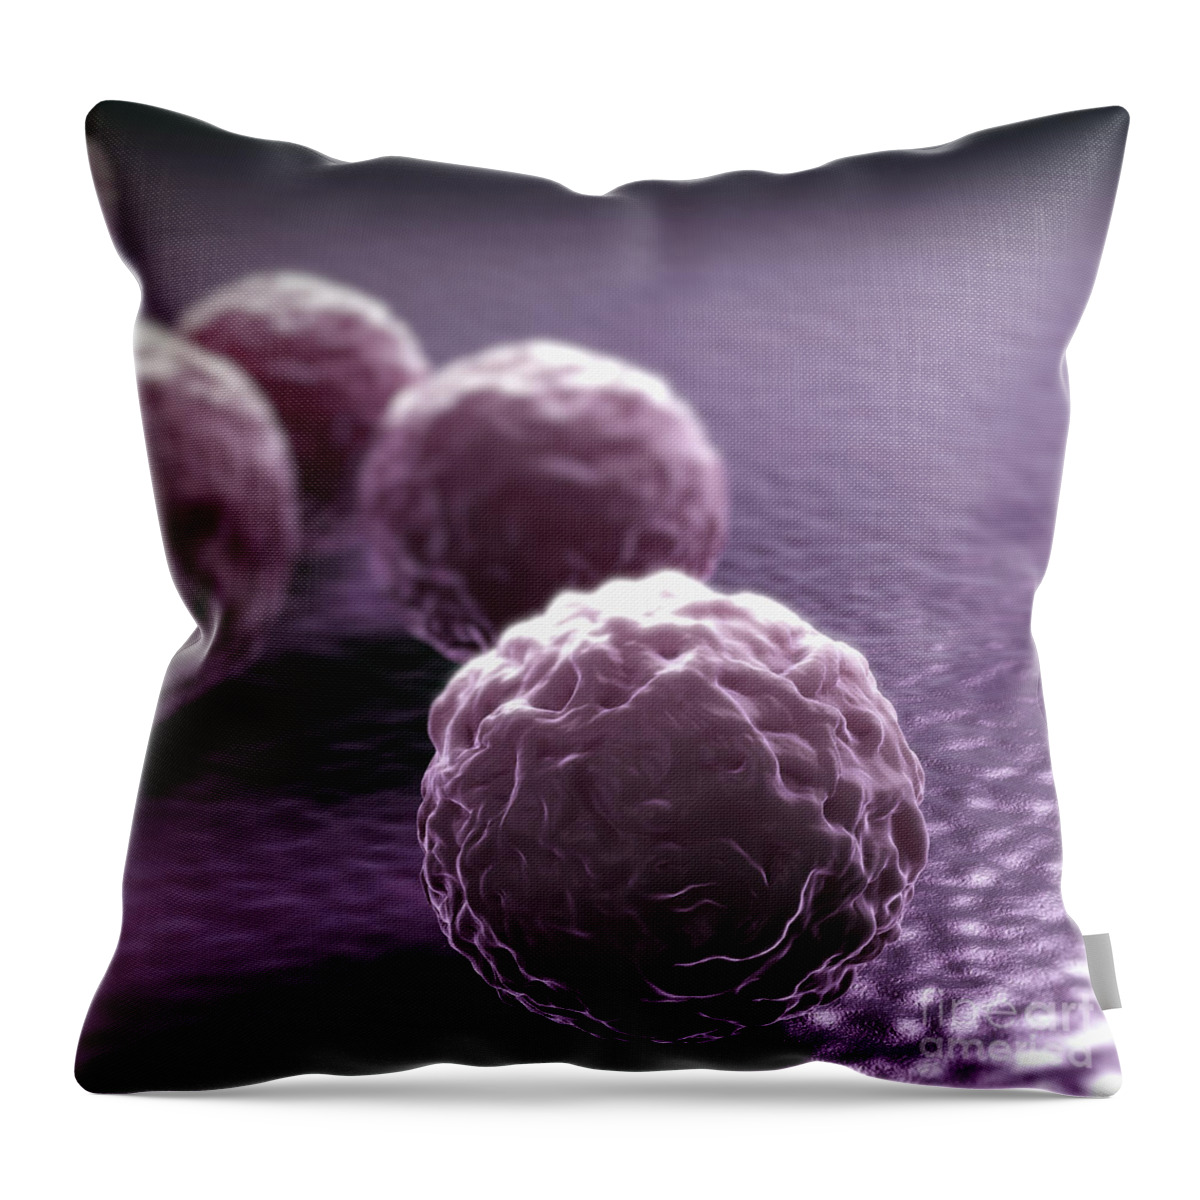 Cells Throw Pillow featuring the photograph Chlamydia Bacteria #4 by Science Picture Co